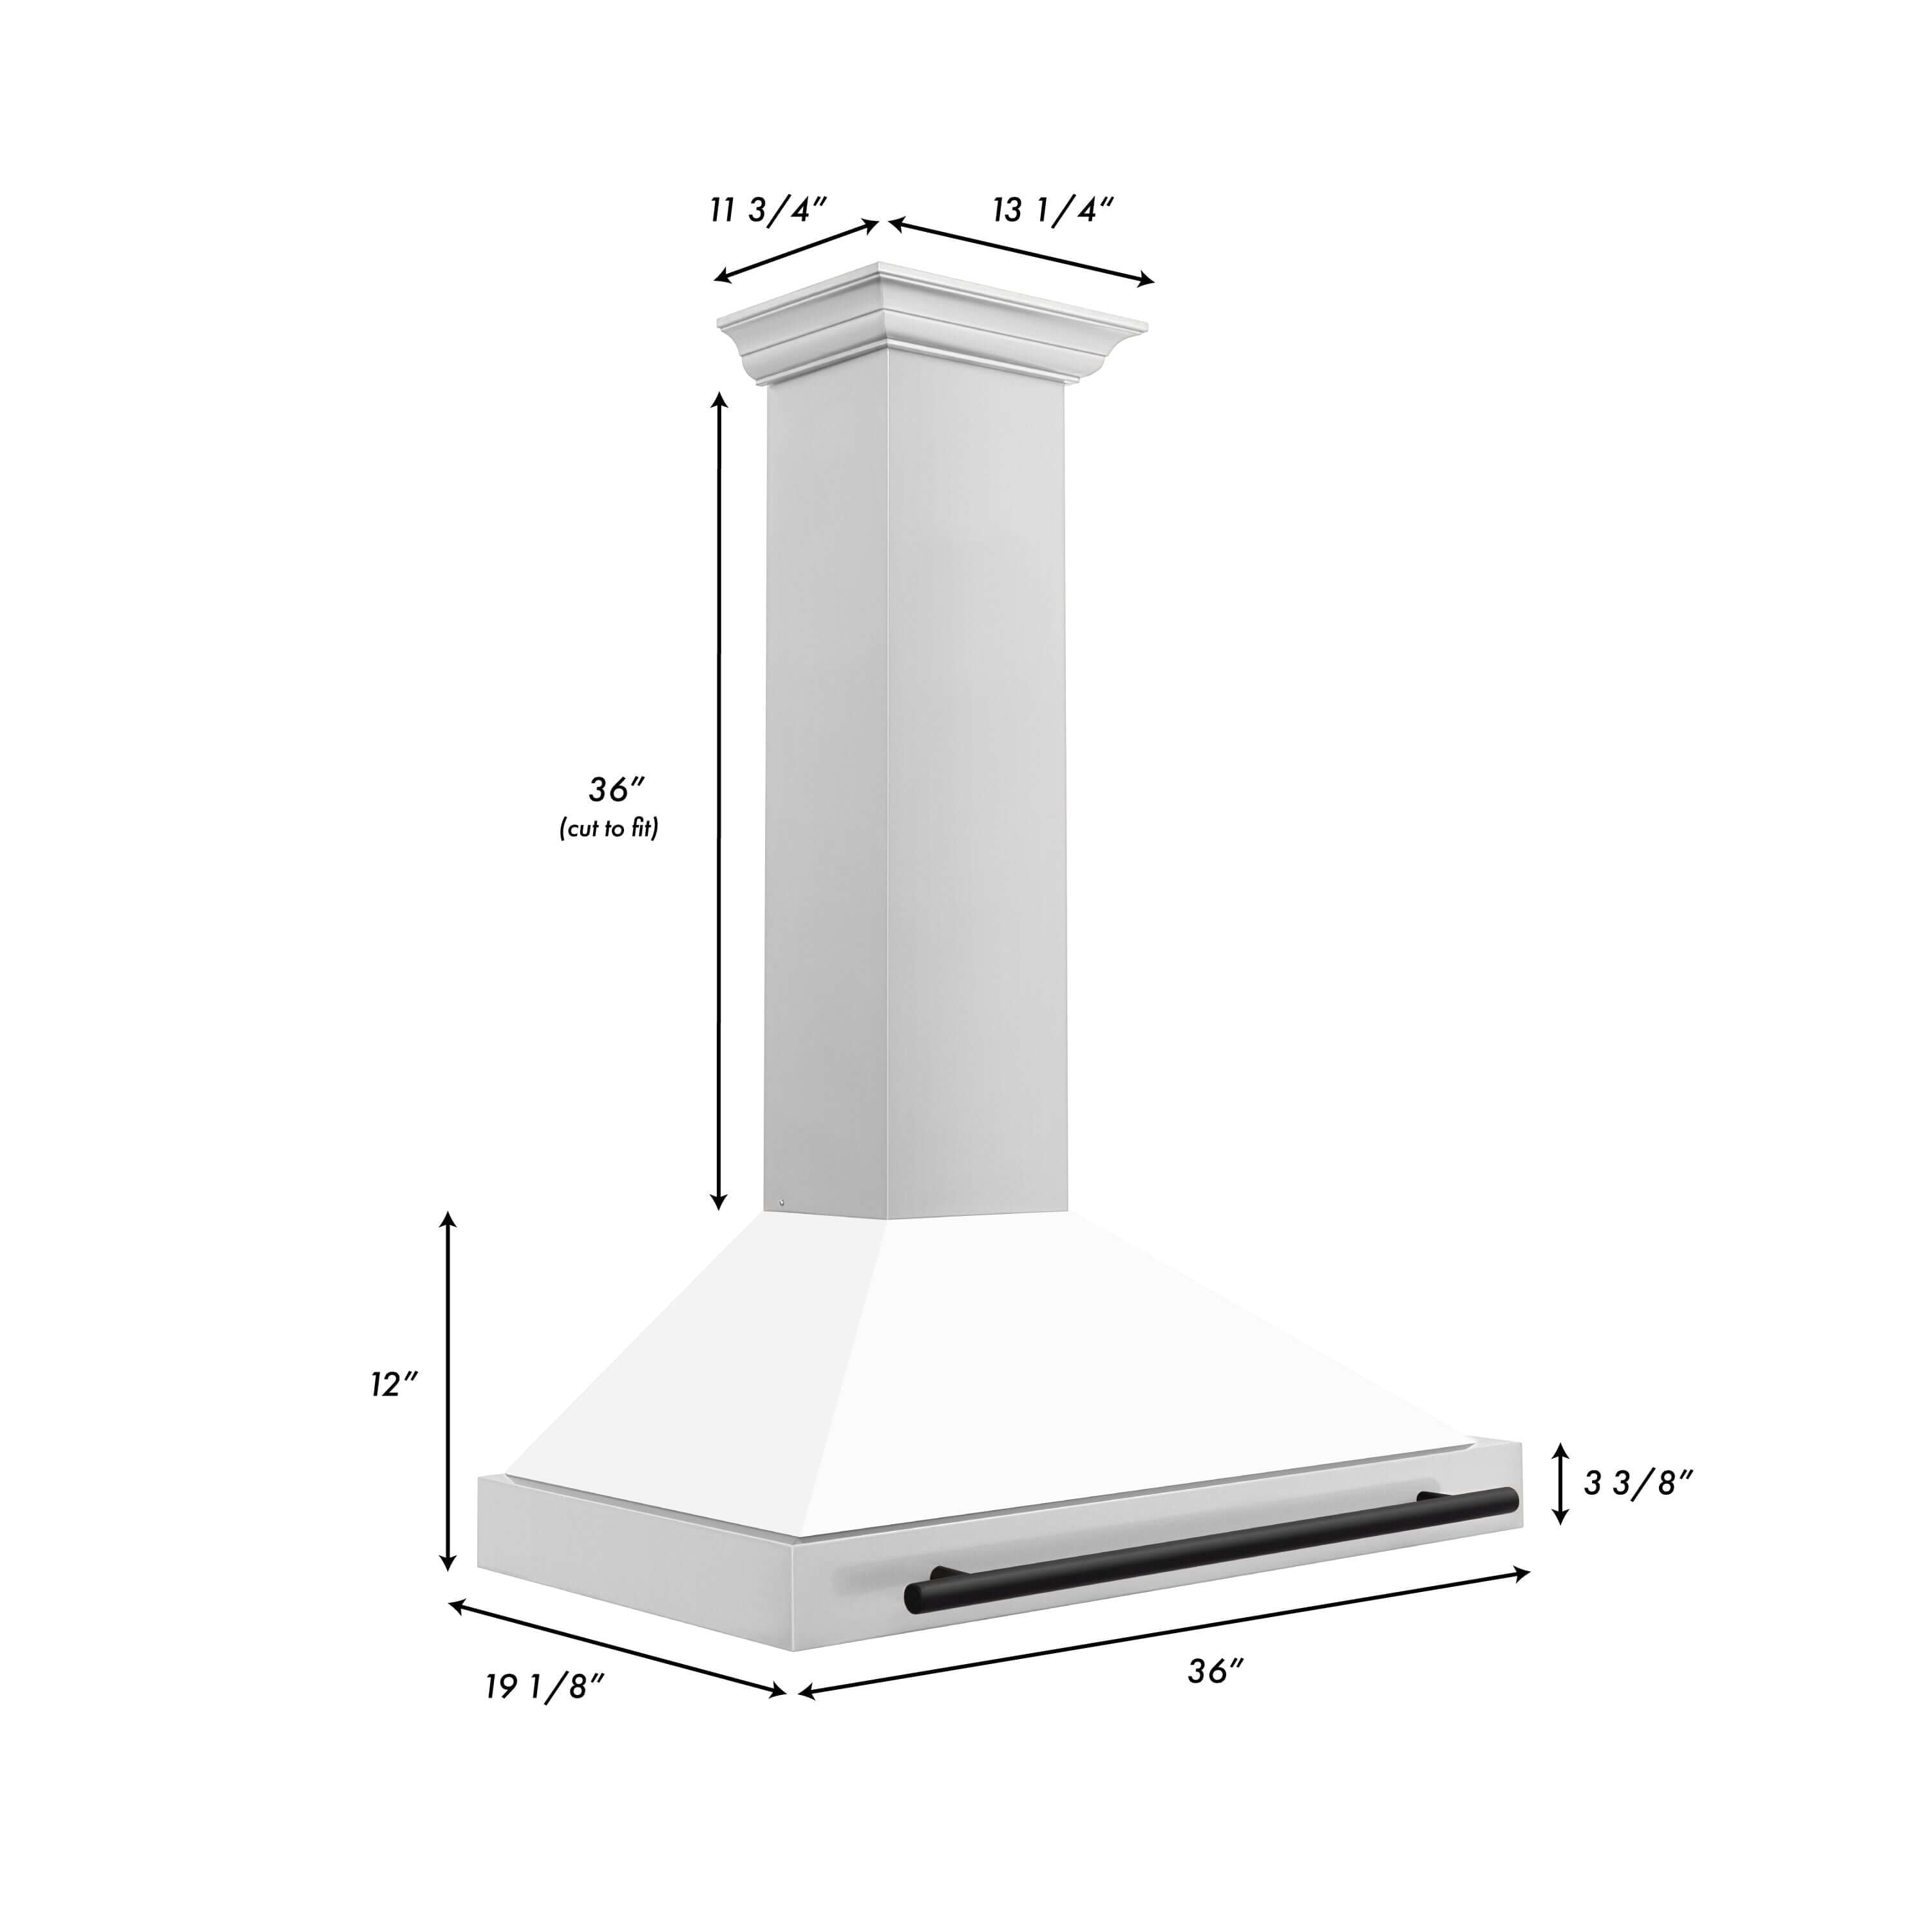 ZLINE 36 in. Autograph Edition Stainless Steel Range Hood with White Matte Shell and Matte Black Accents (KB4STZ-WM36) Dimensions and Measurements